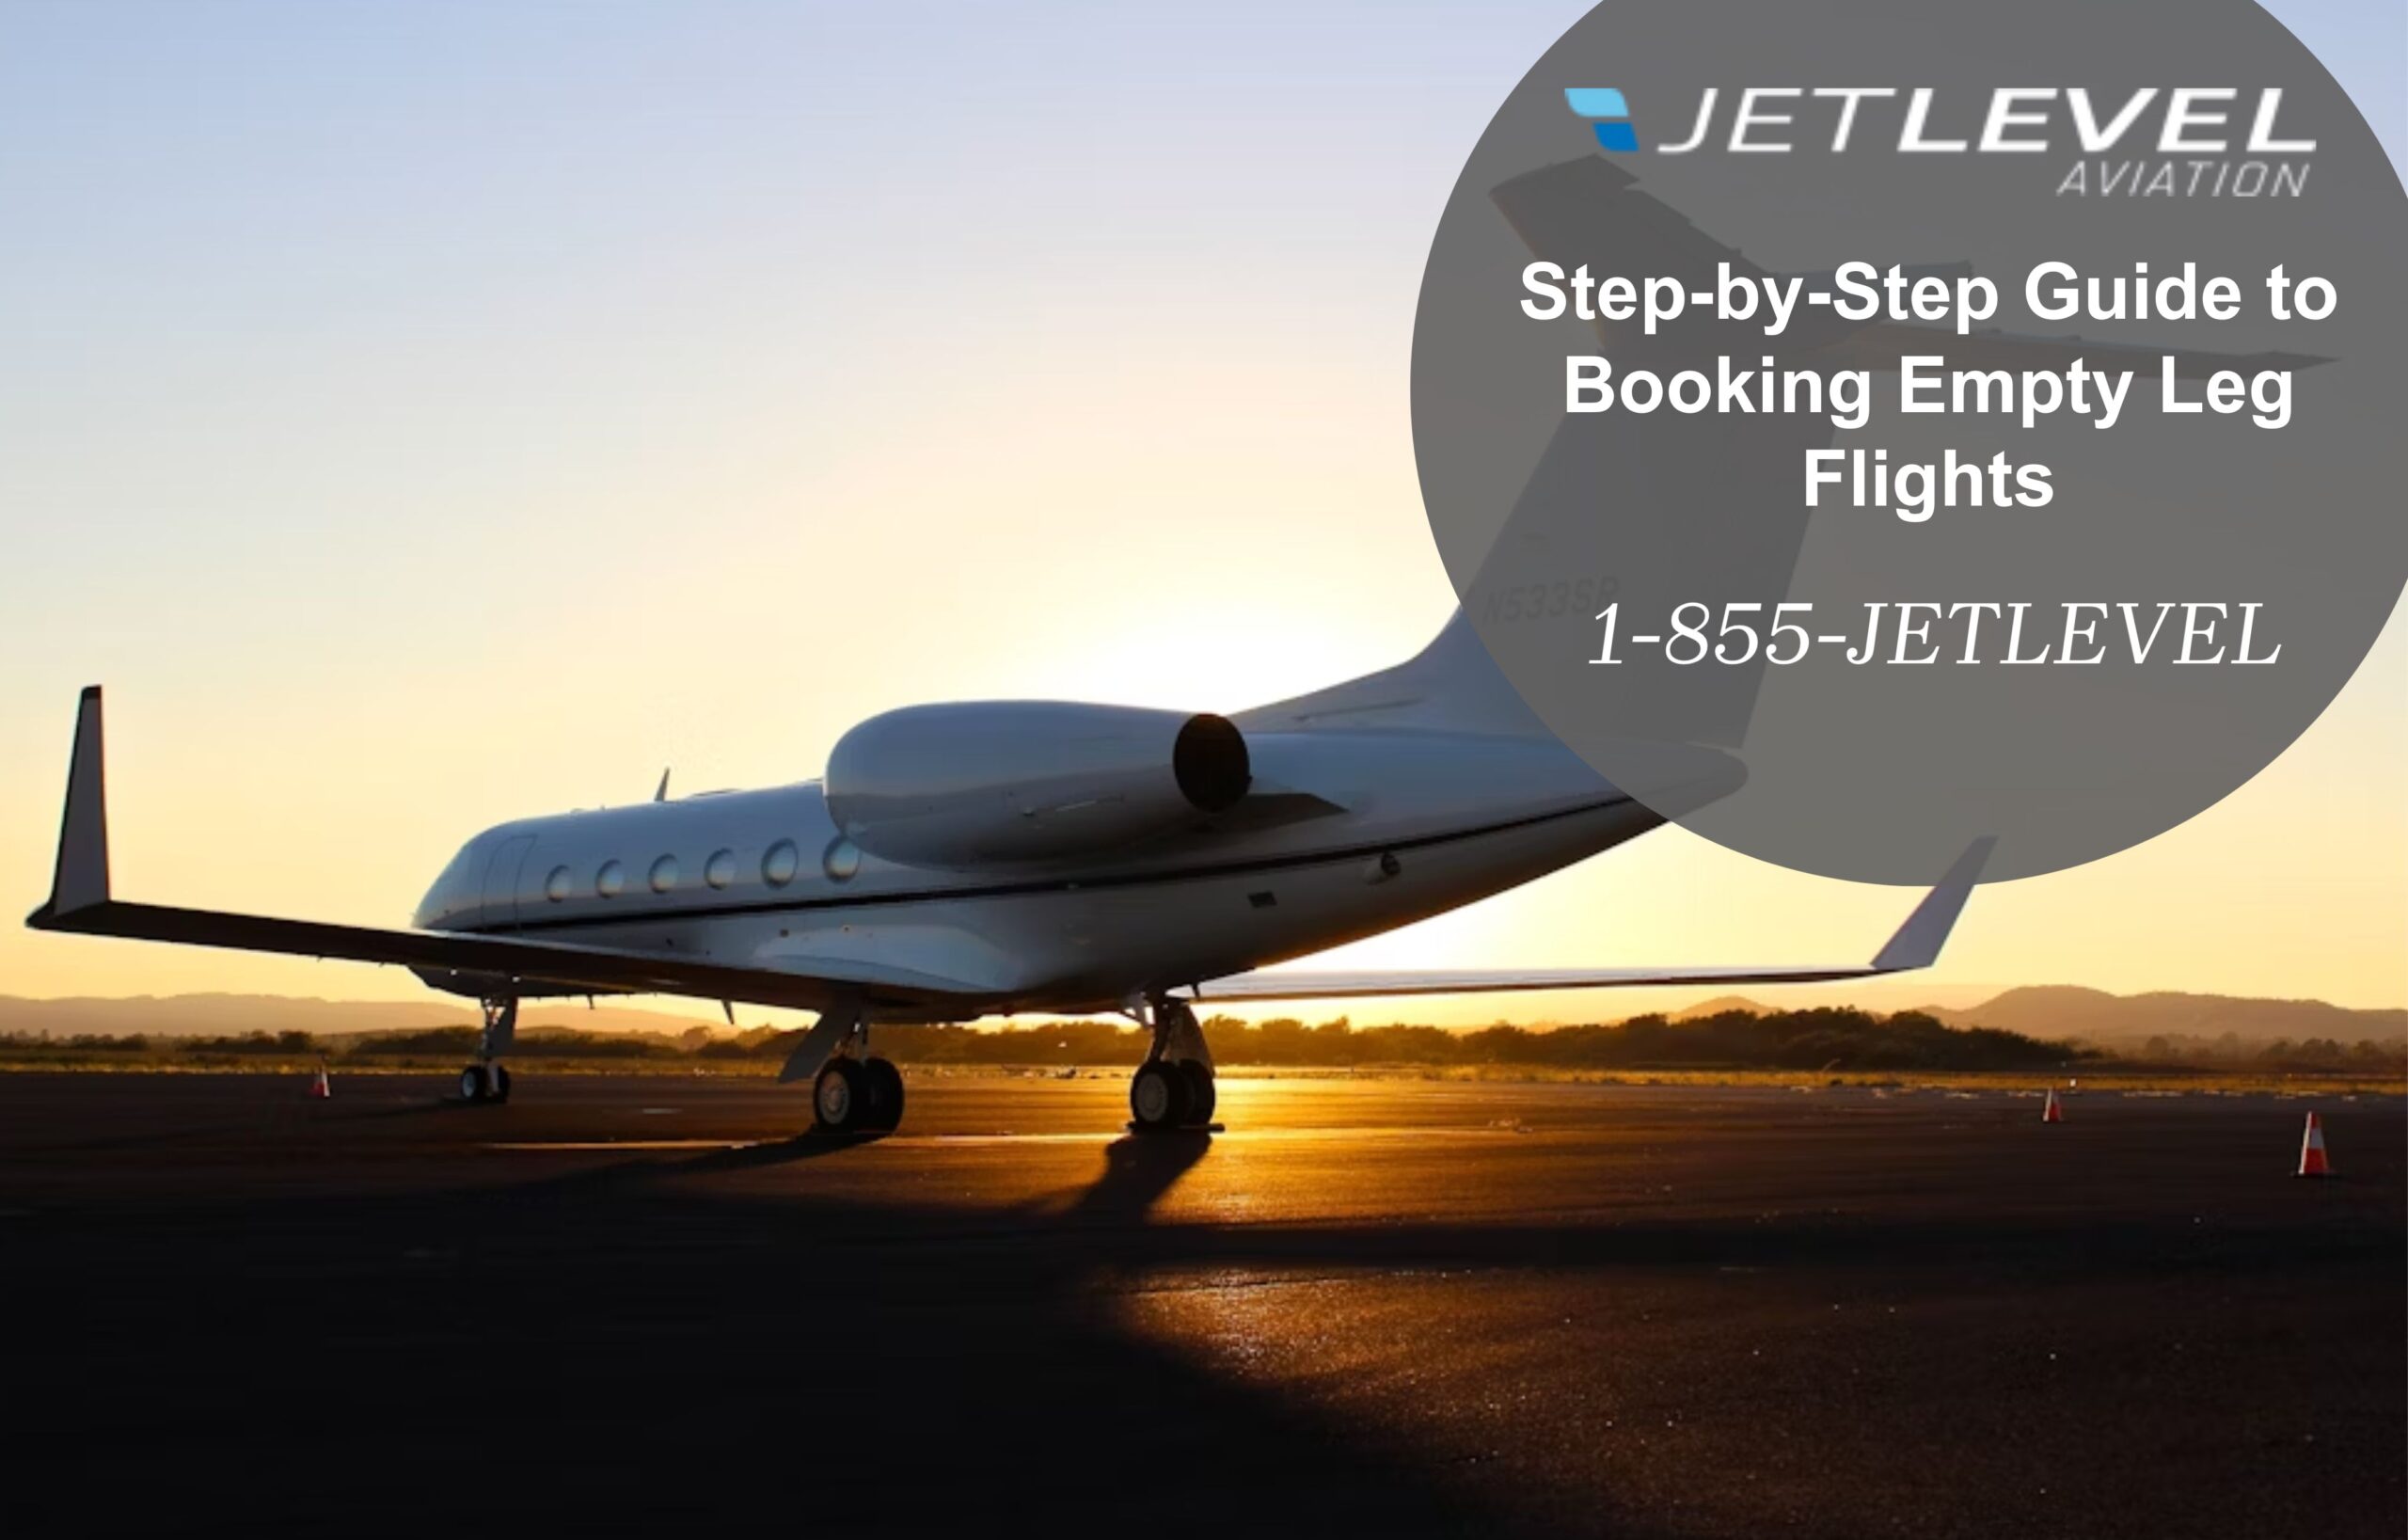 Step-by-Step Guide to Booking Empty Leg Flights